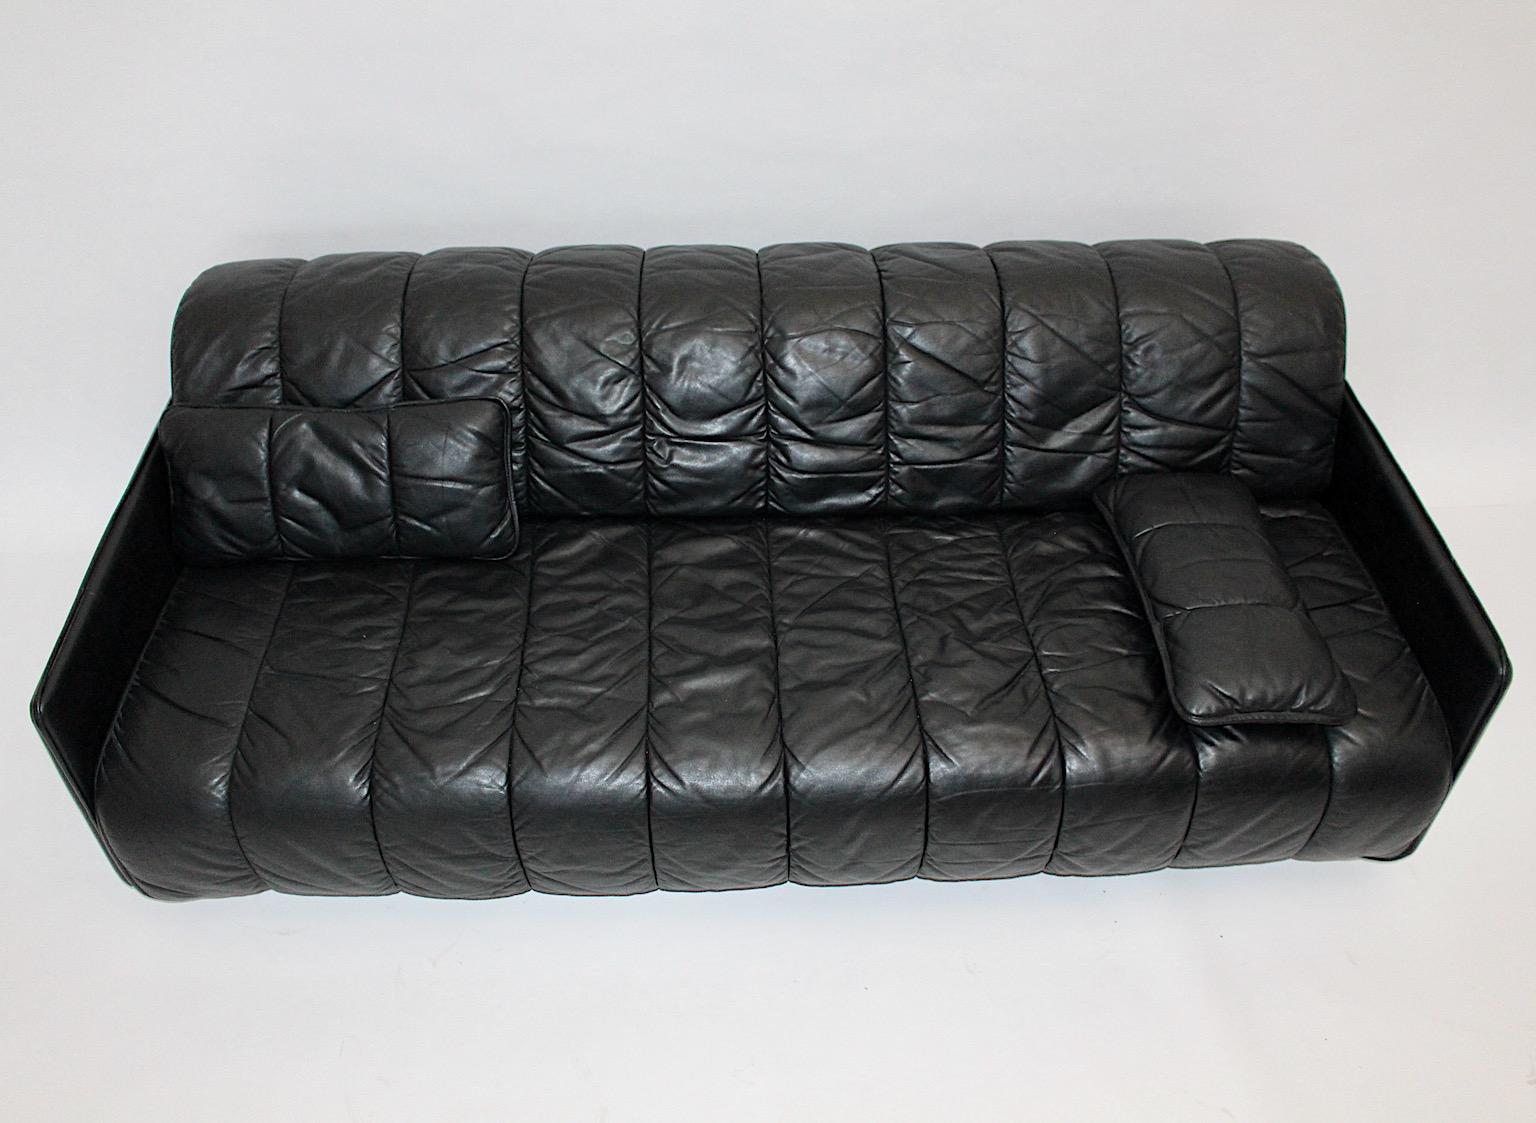 Swiss DeSede Black Leather Vintage Freestanding DS 69 Sofa Daybed 1970s Switzerland For Sale